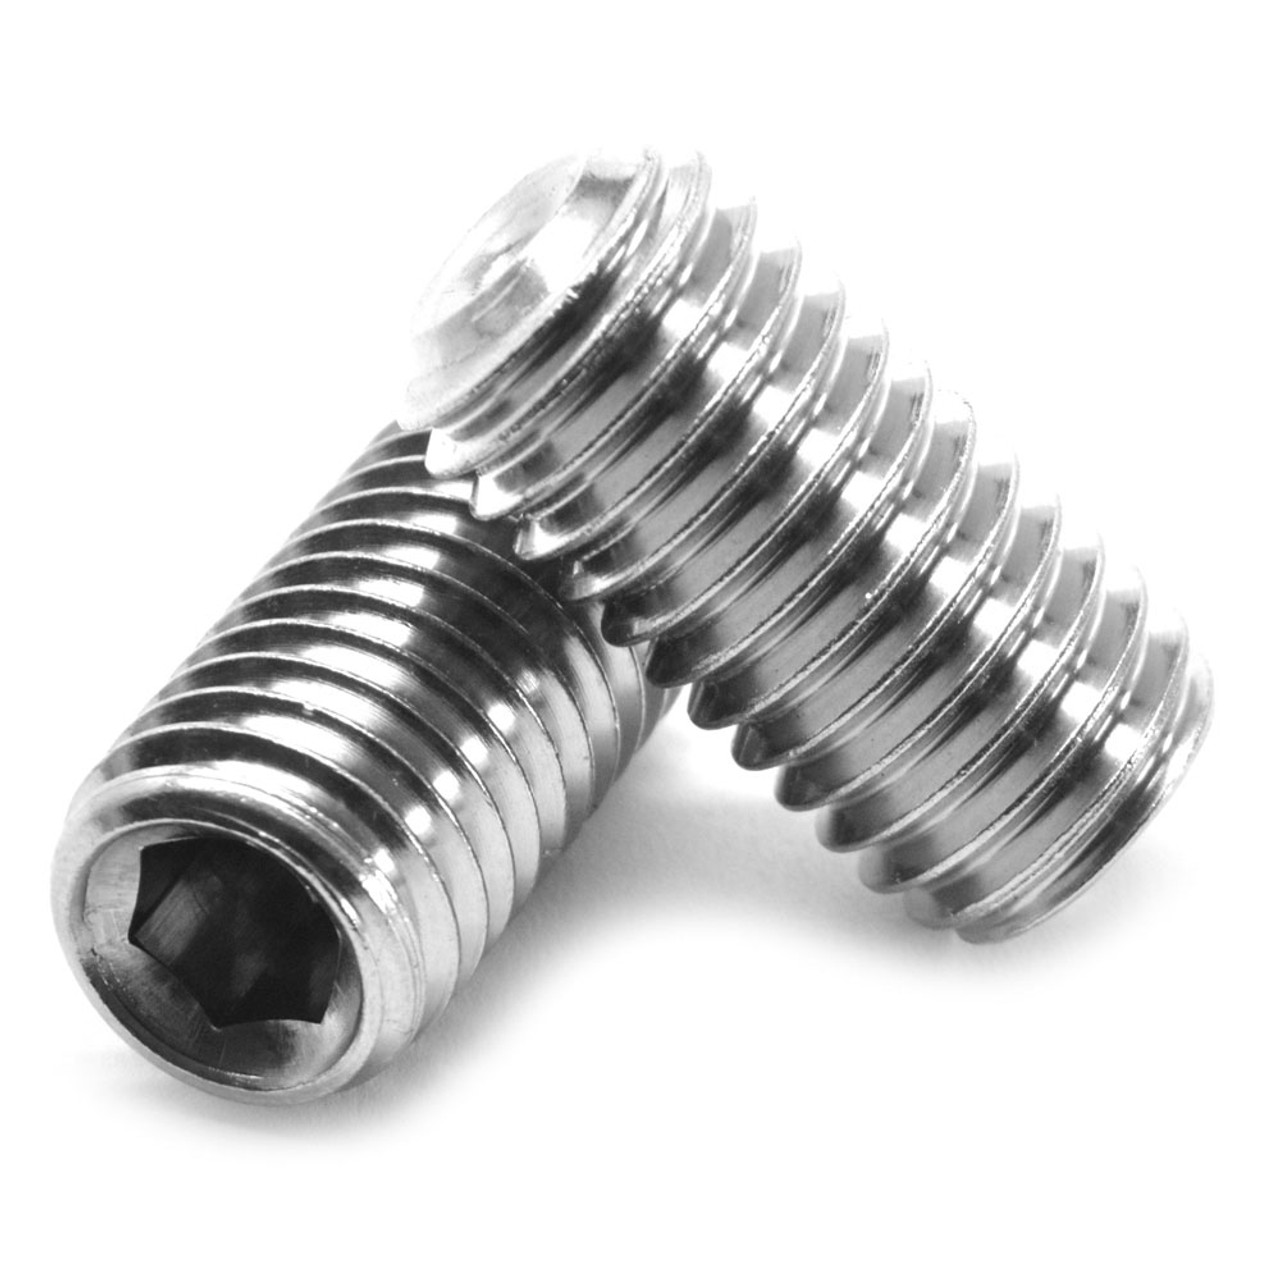 5/16"-18 x 3/8" Coarse Thread Socket Set Screw Cup Point Stainless Steel 316